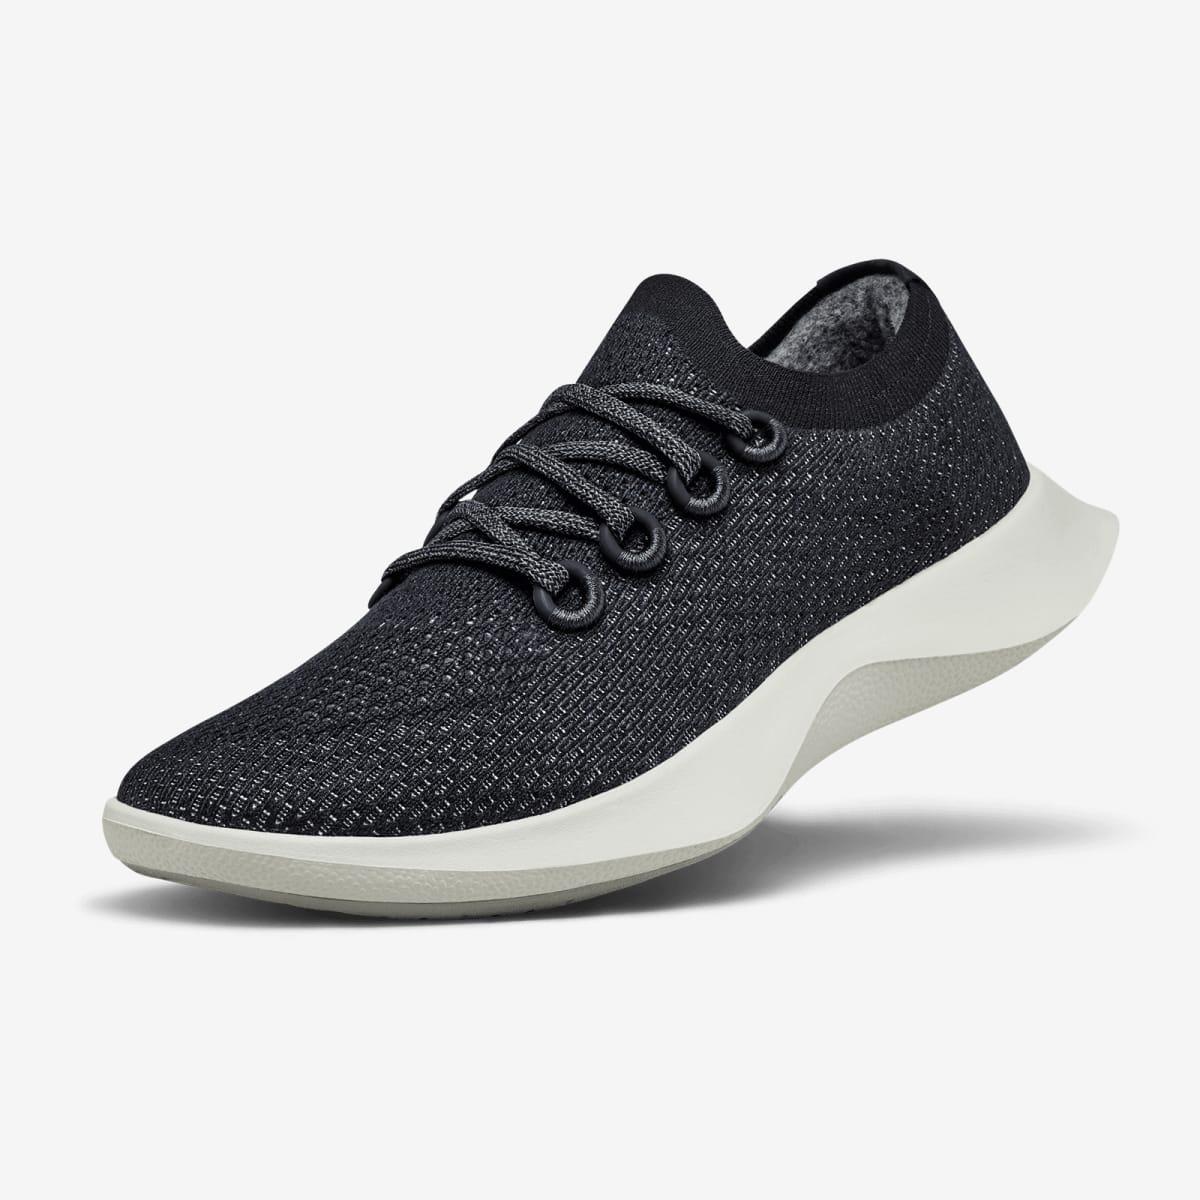 Allbirds Tree Dashers Running Shoes for $99 Shipped